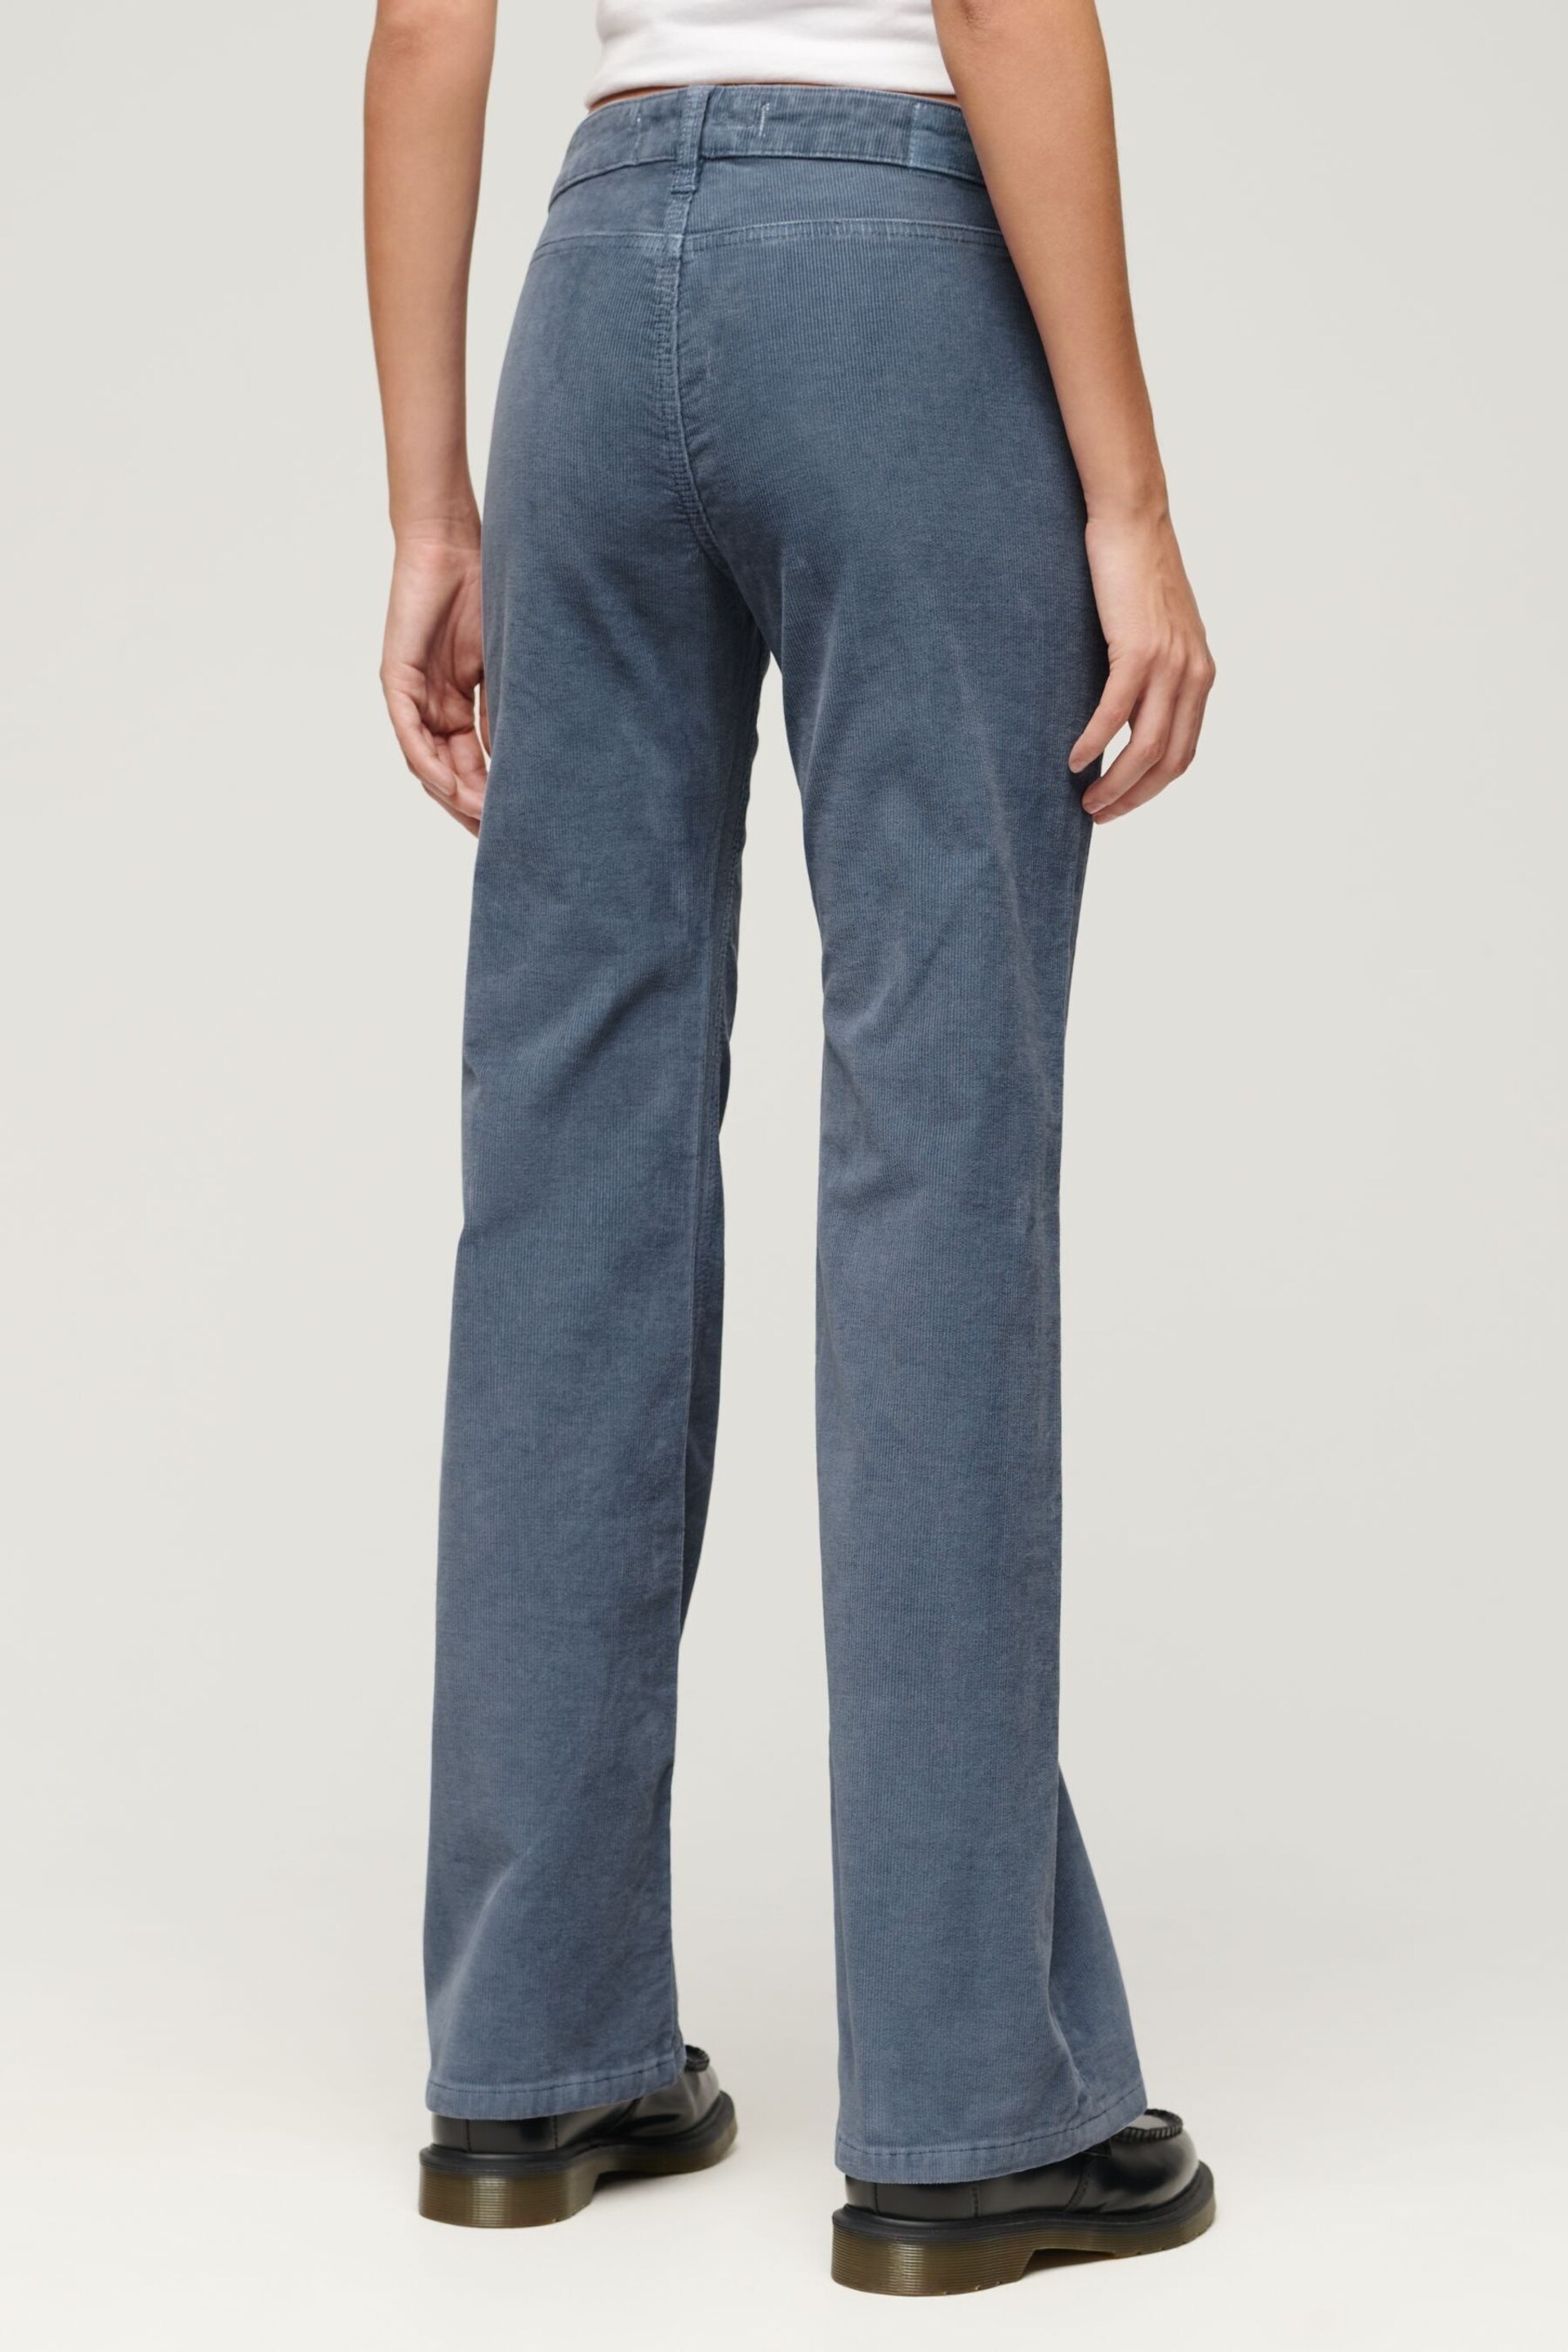 Superdry Blue Low Rise Cord Flare Jeans - Image 3 of 3